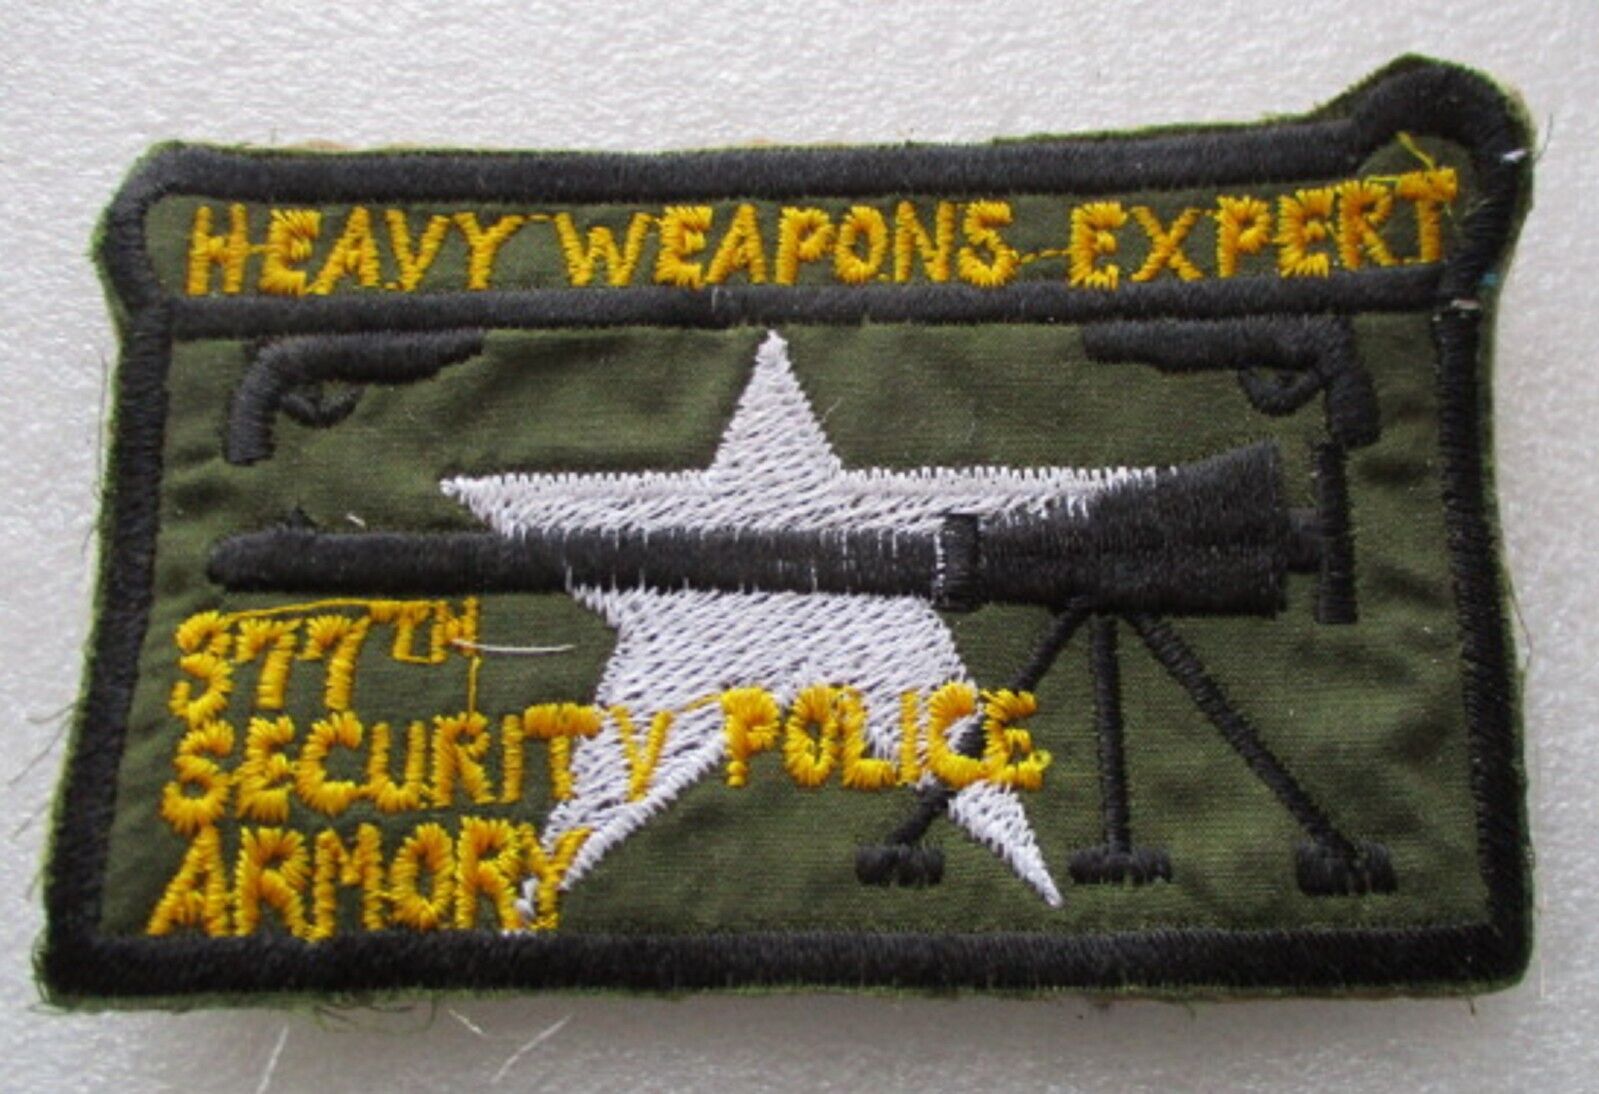 HEAVY WEAPONS EXPERT 377th SECURITY POLICE ARMORY VINTAGE VIETNAM WAR PATCH